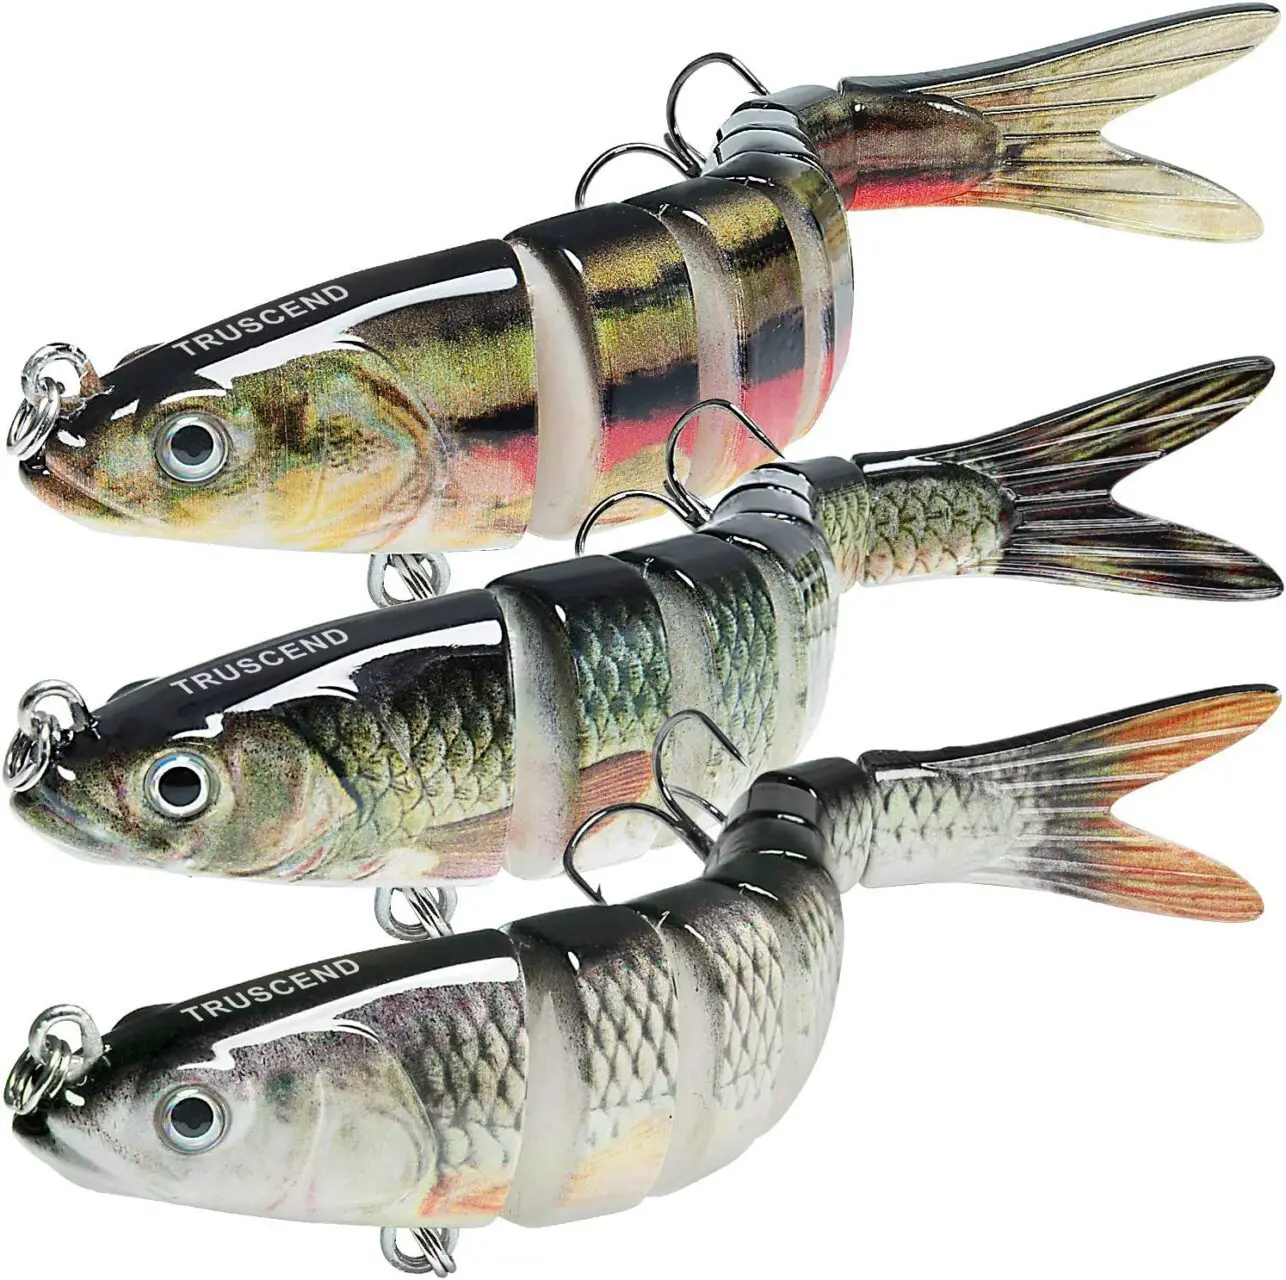 TRUSCEND Fishing Lures Multi Jointed Swimbaits Slow Sinking